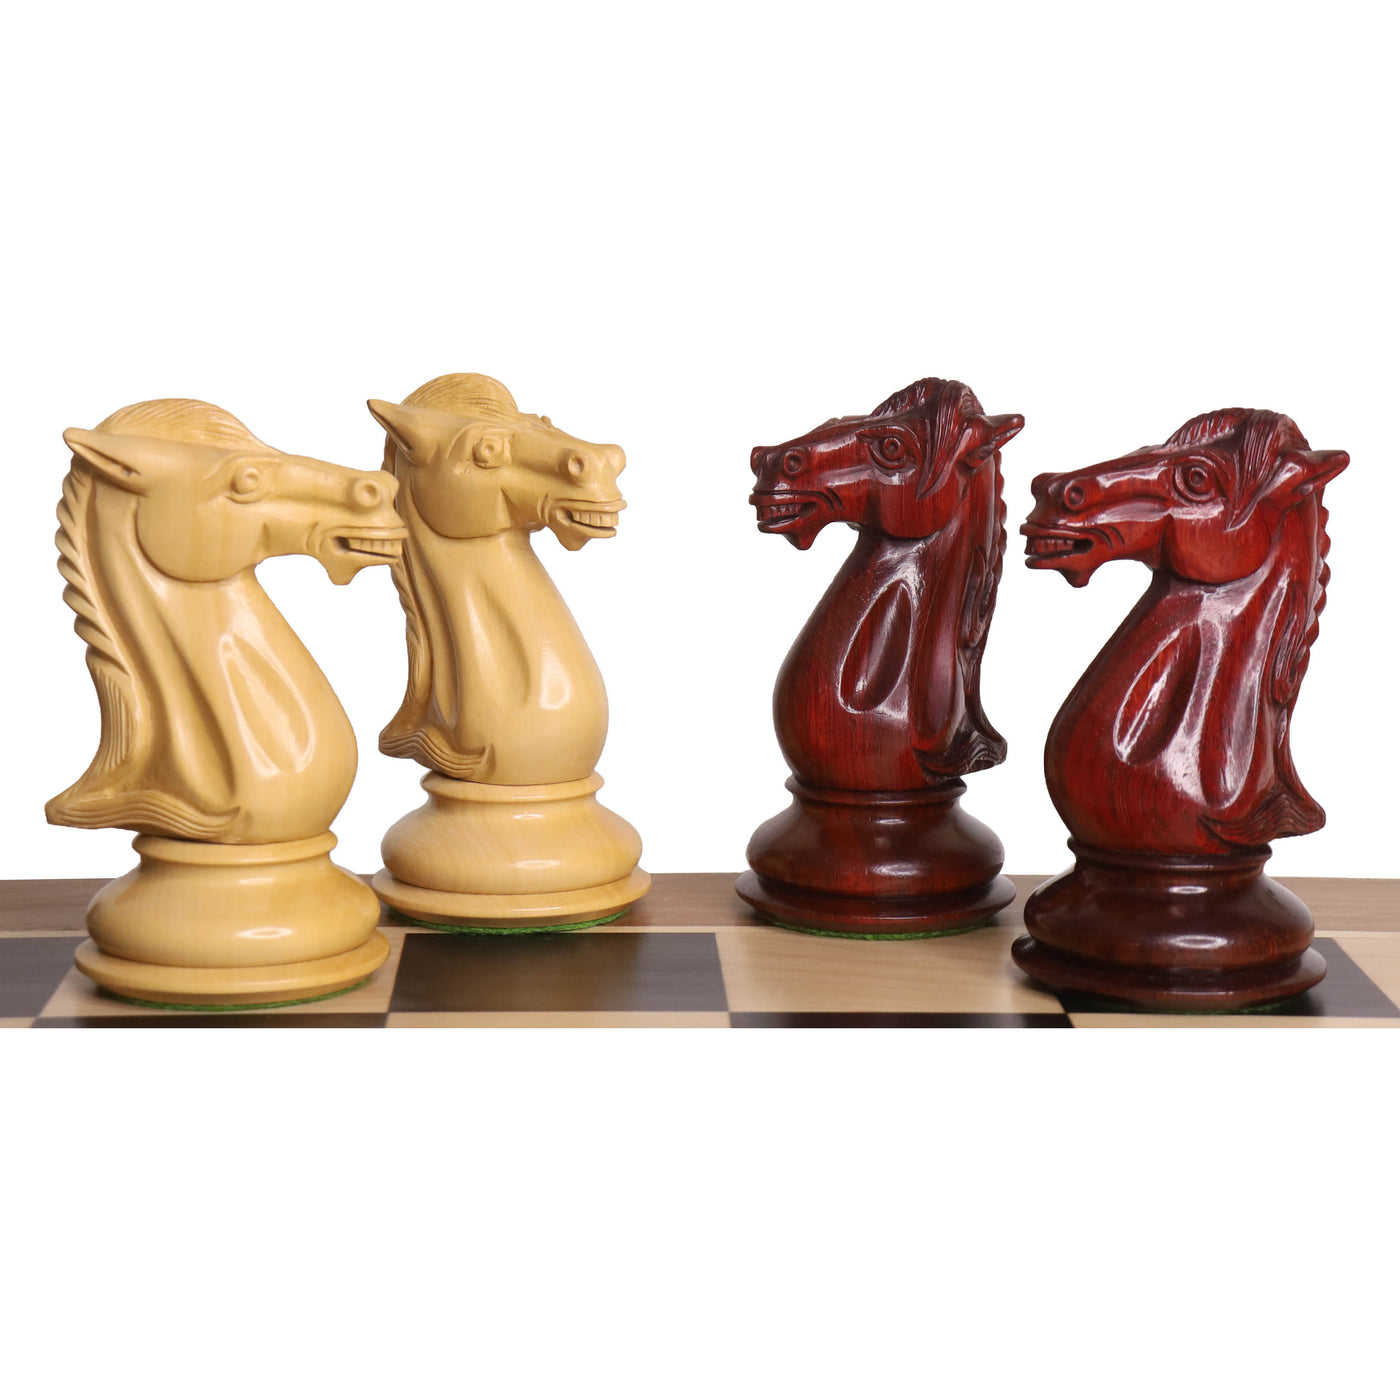 6.1" Mammoth Luxury Staunton Chess Pieces Only Set - Bud Rosewood -Triple Weight